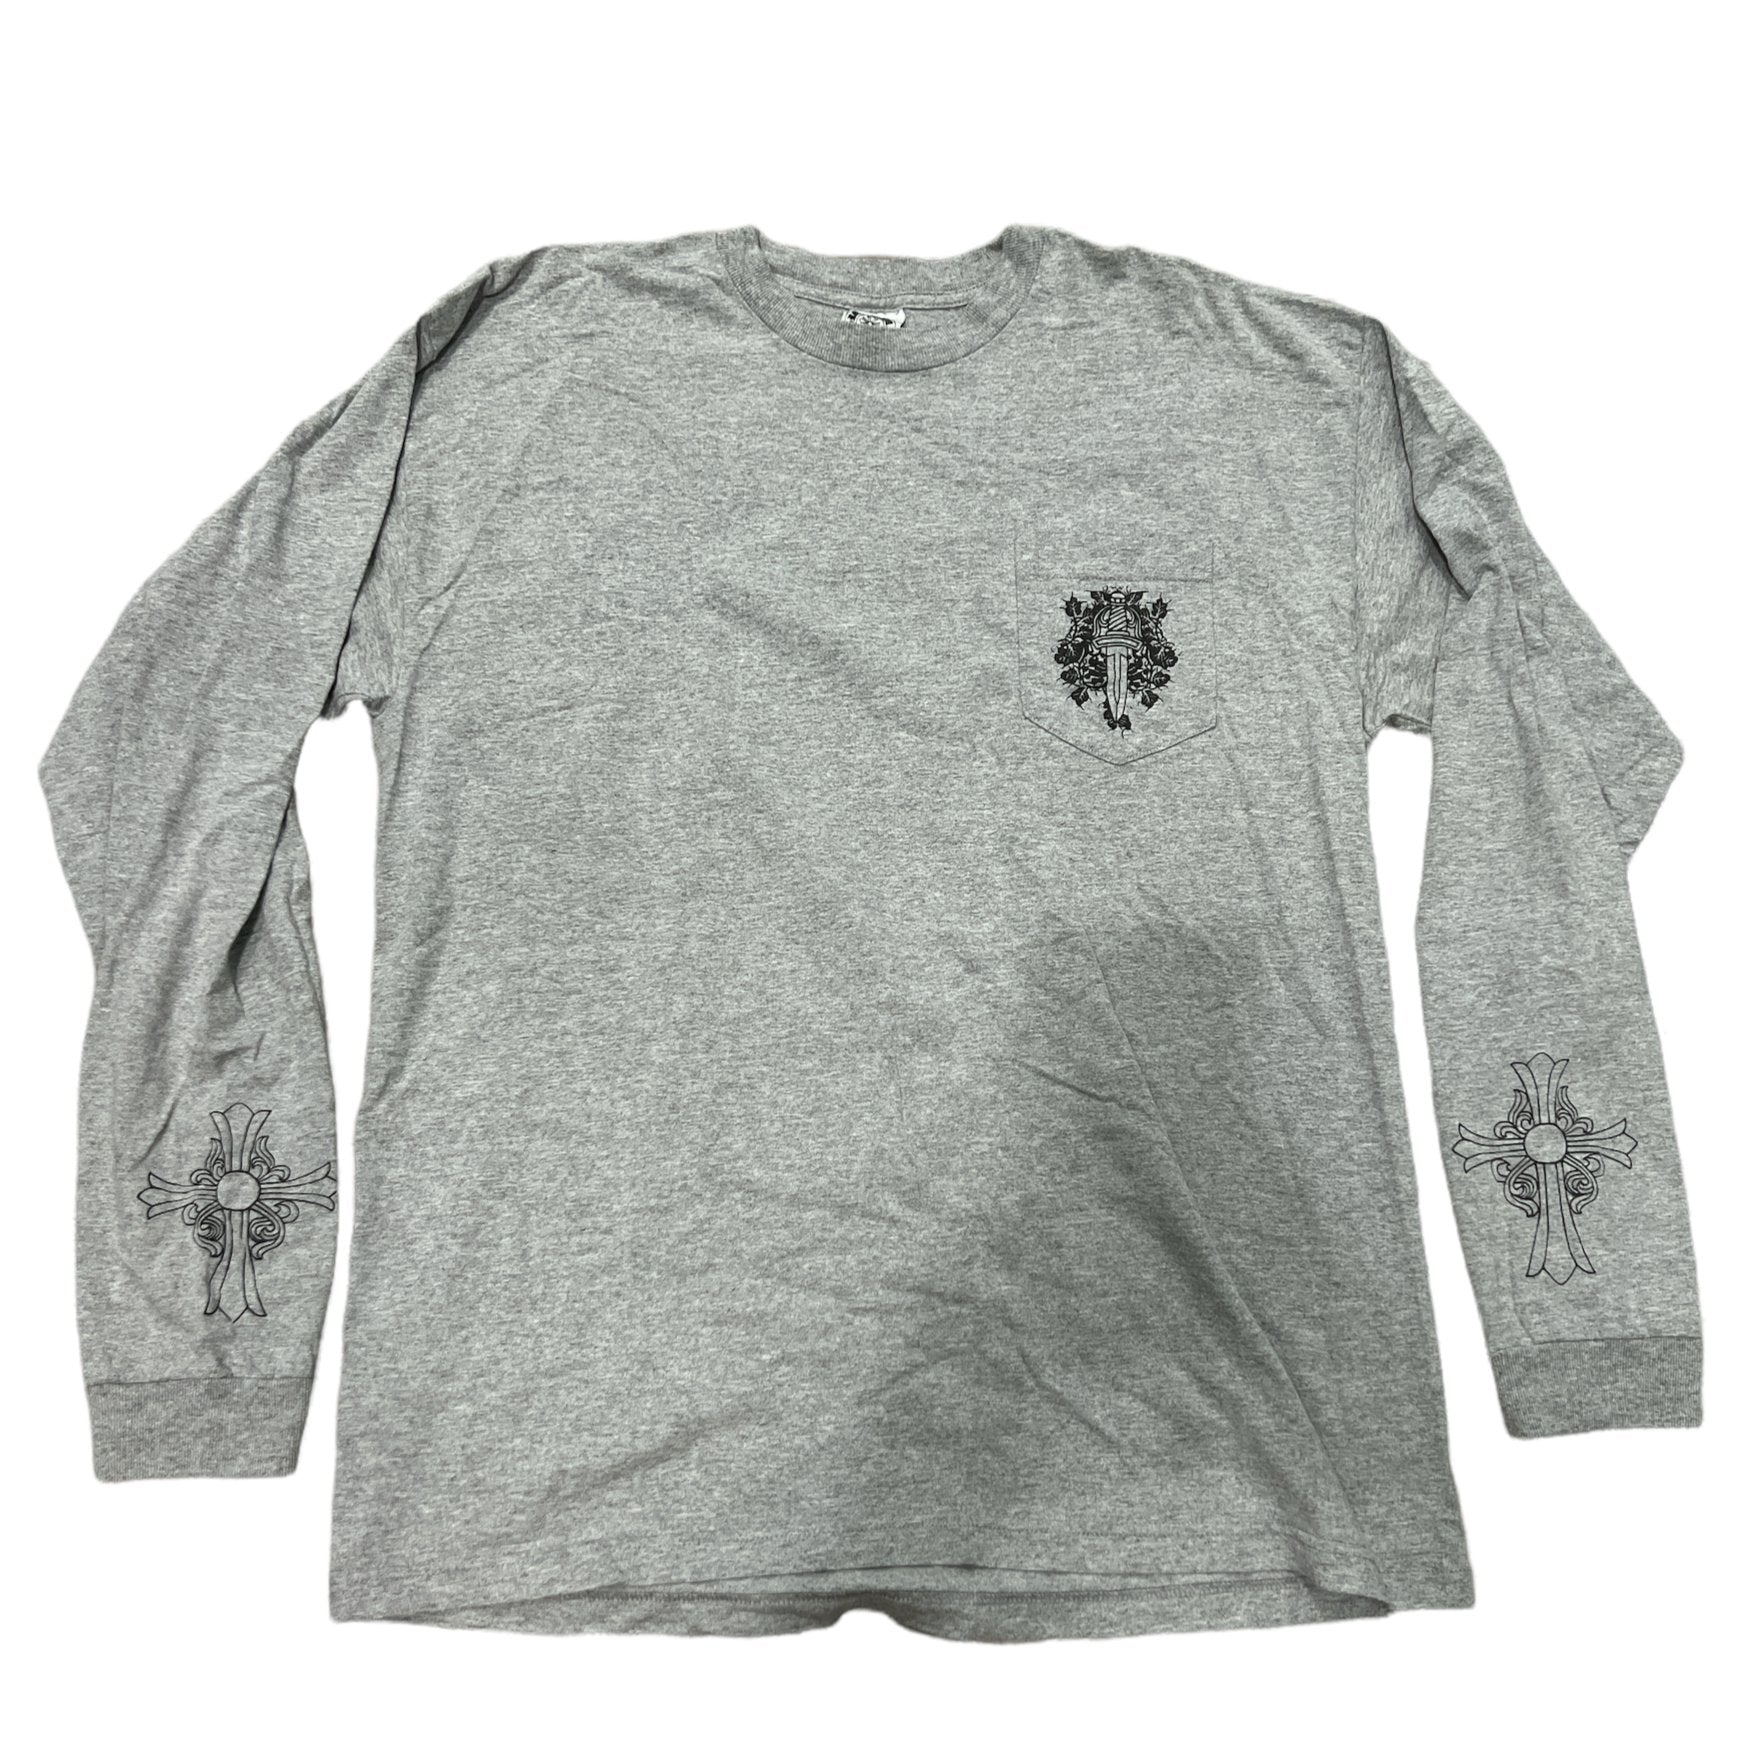 Chrome Hearts Dagger L/S T-Shirt Heather Grey (Vintage 1990s) - Supra Sneakers